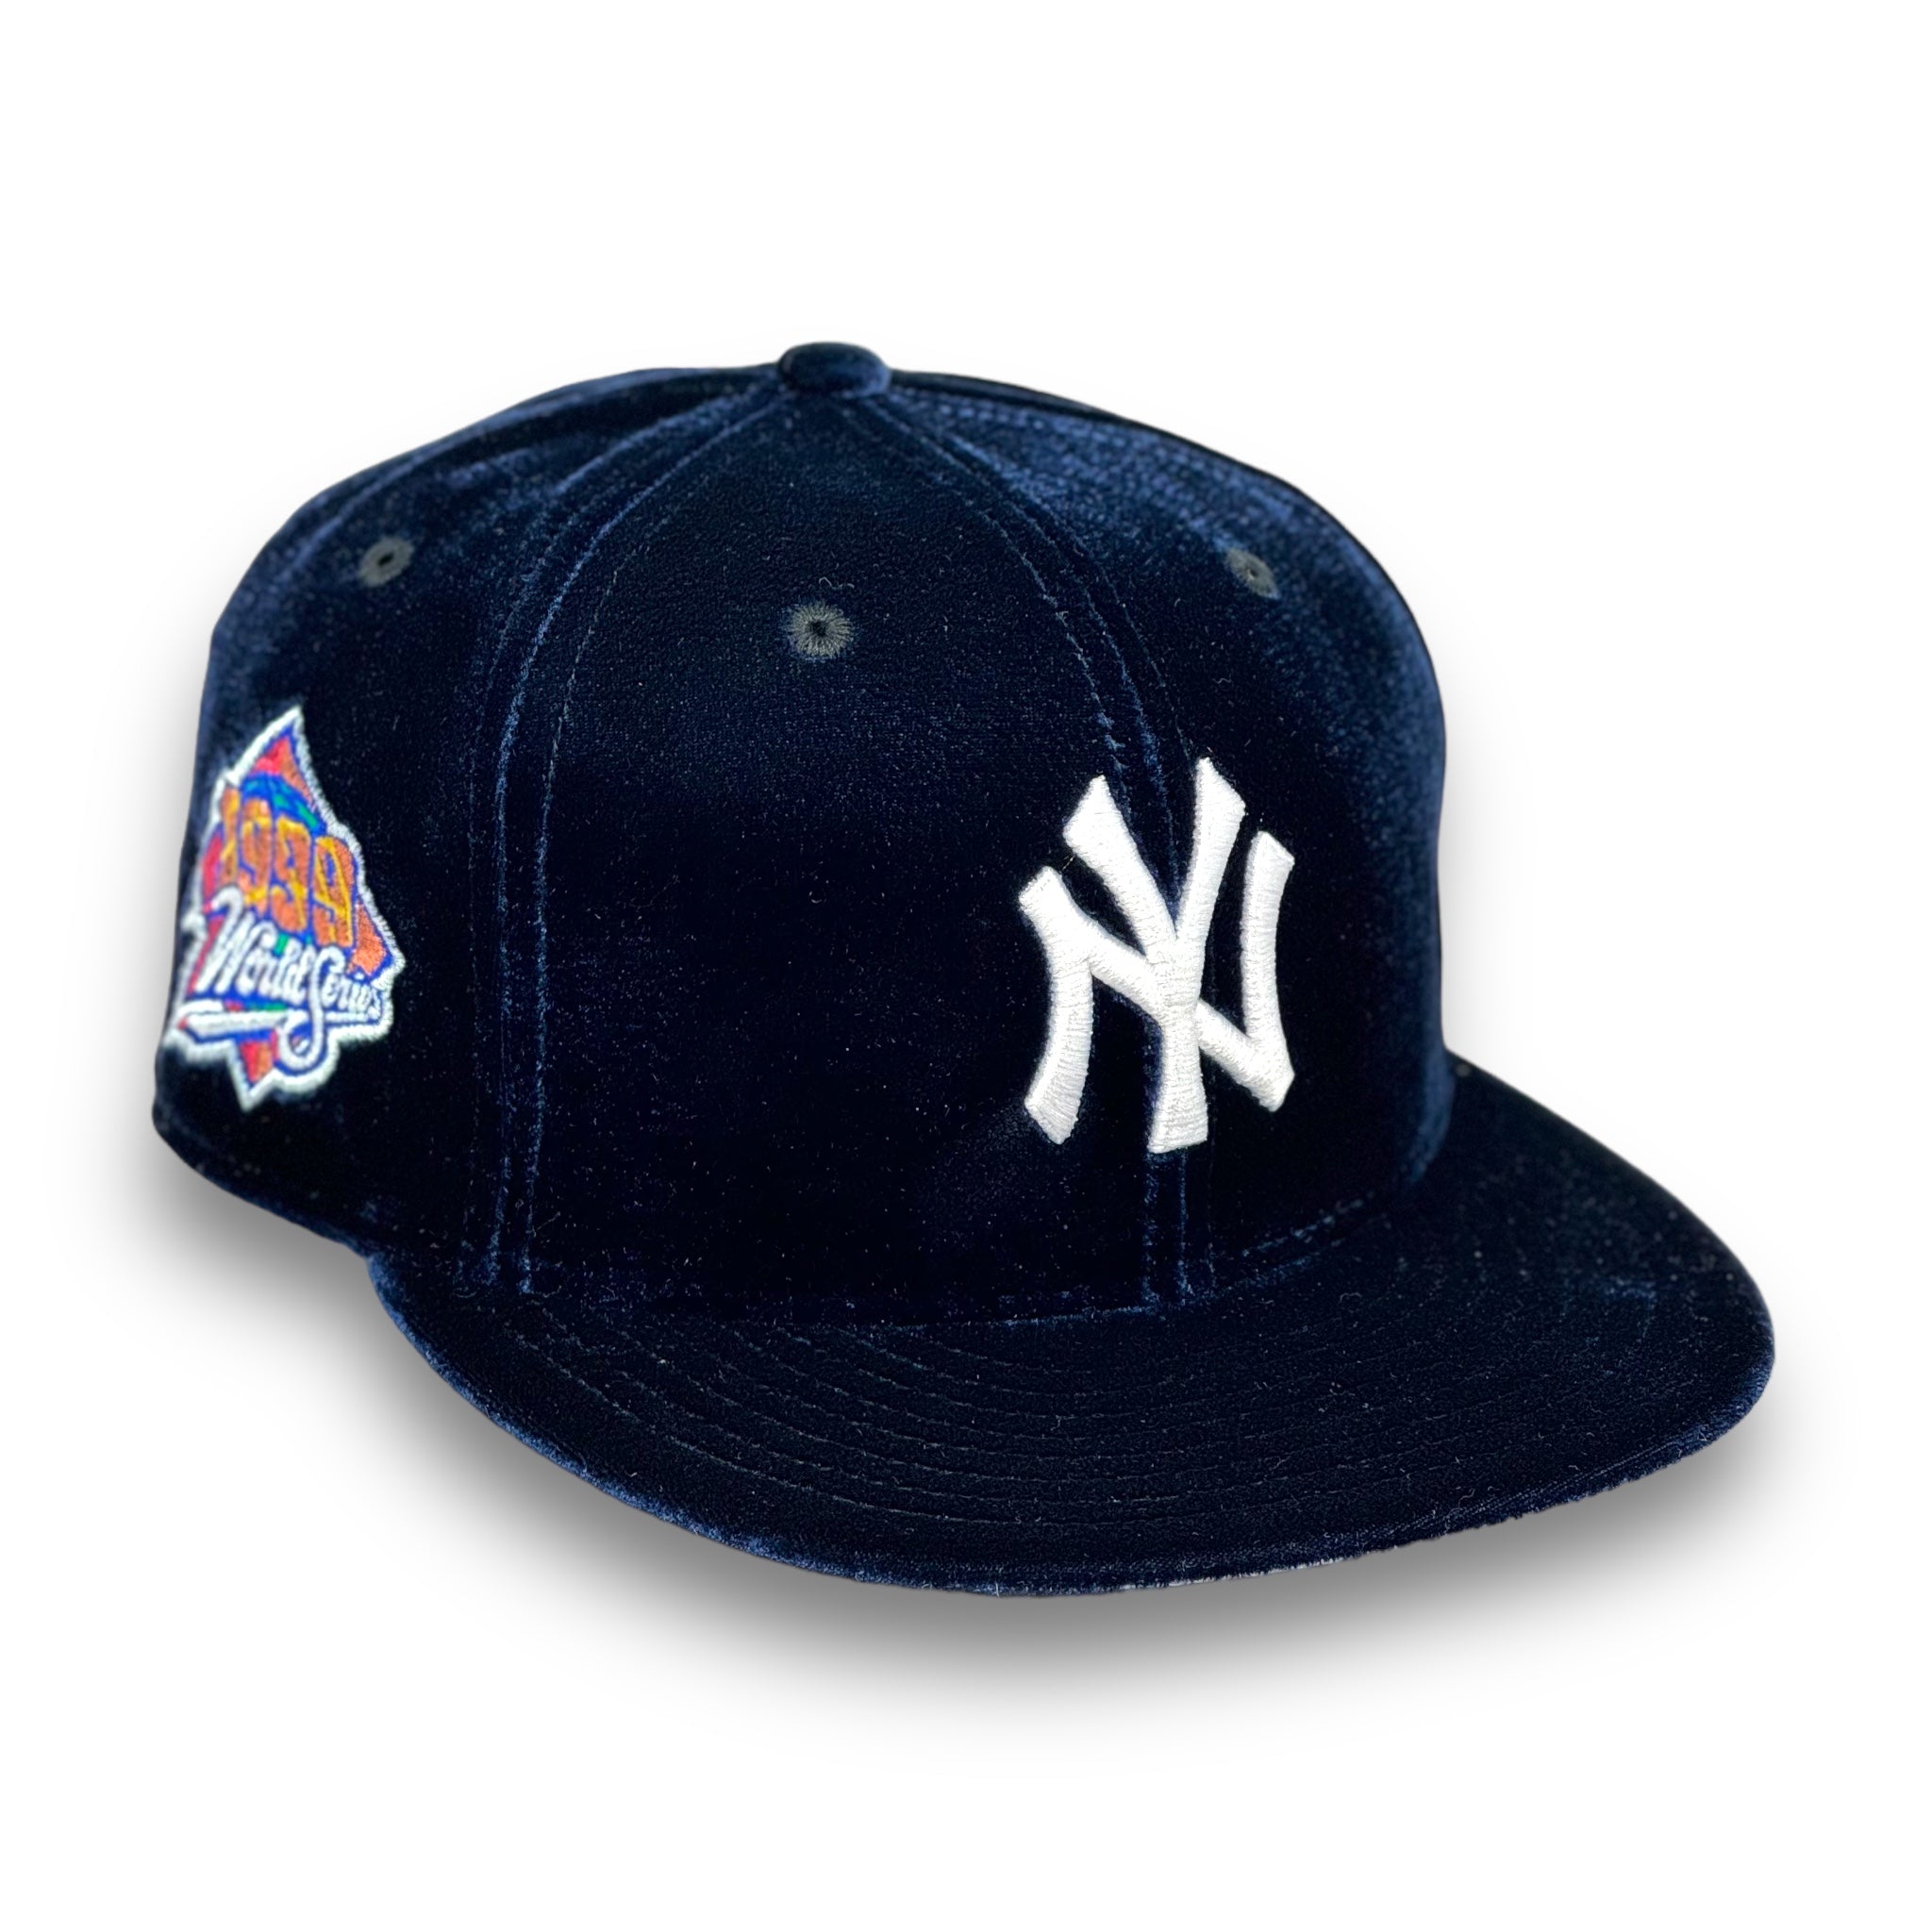 NEW YORK YANKEES (NAVY) (1999 WS "VELVET COLLECTION") NEW ERA 59FIFTY FITTED